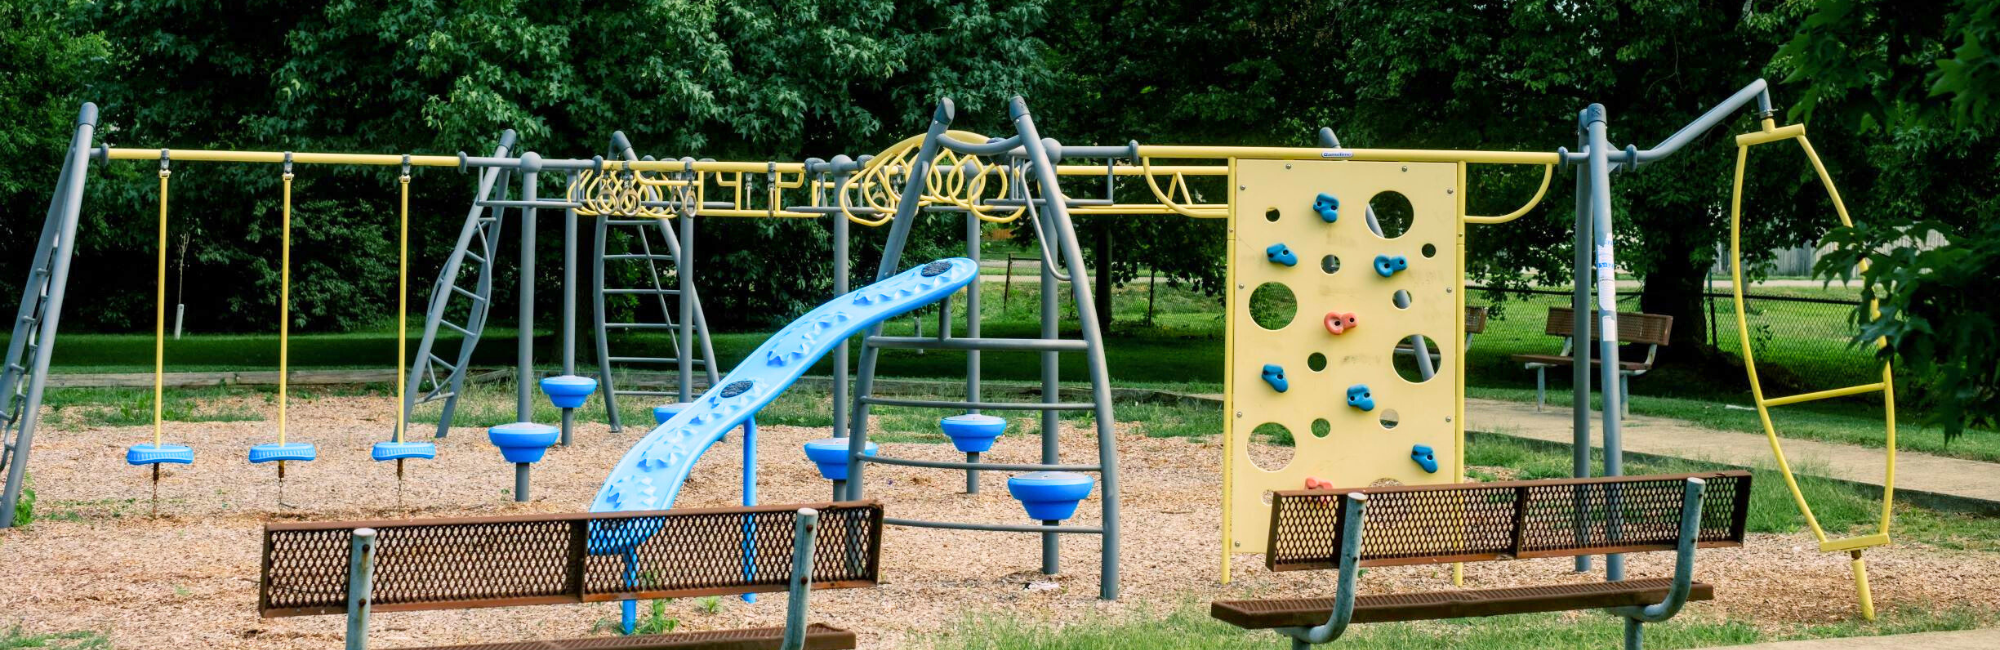 Park with a playground and benches